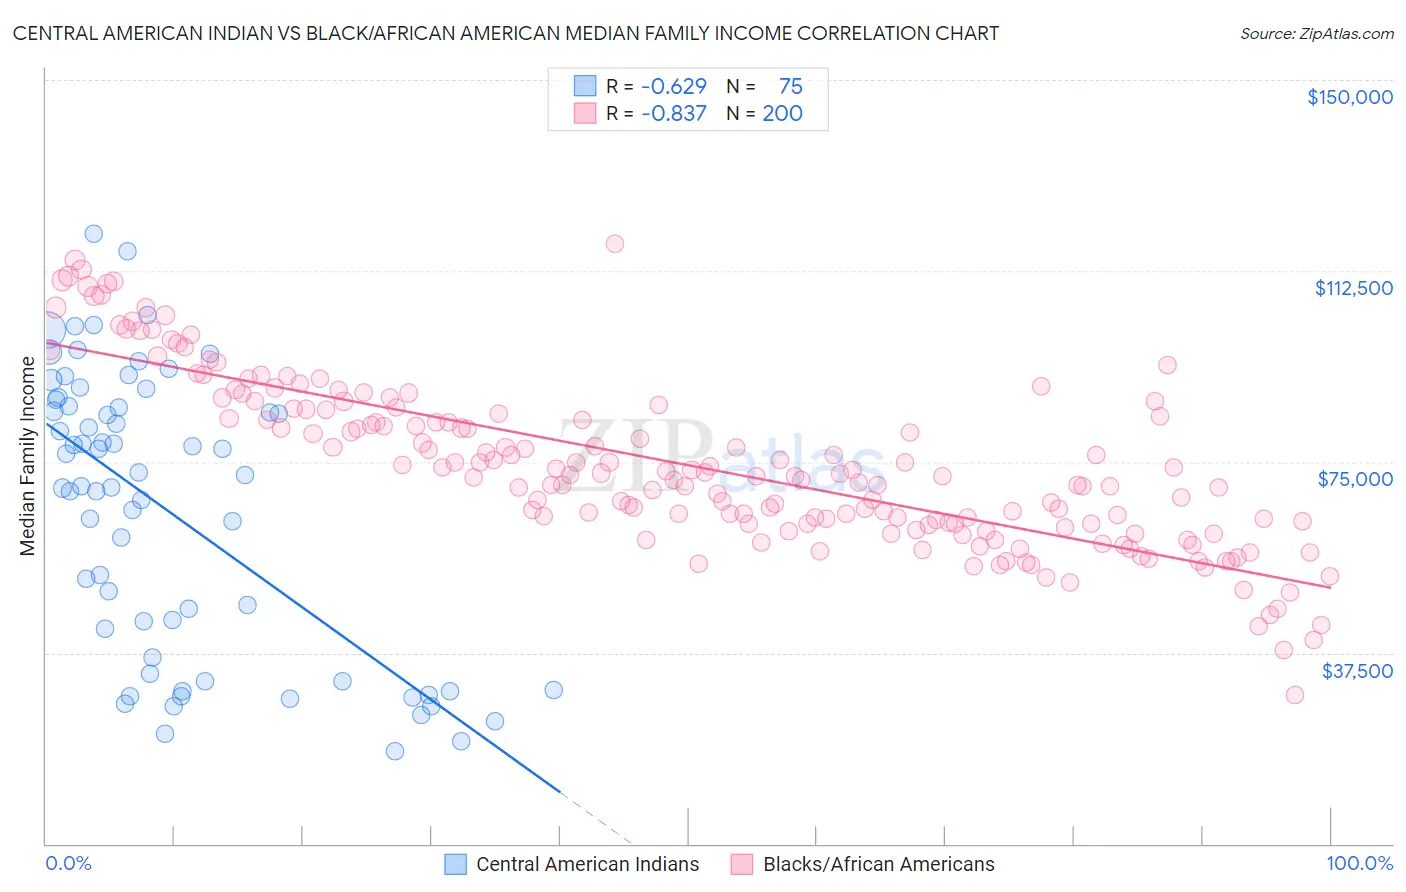 Central American Indian vs Black/African American Median Family Income